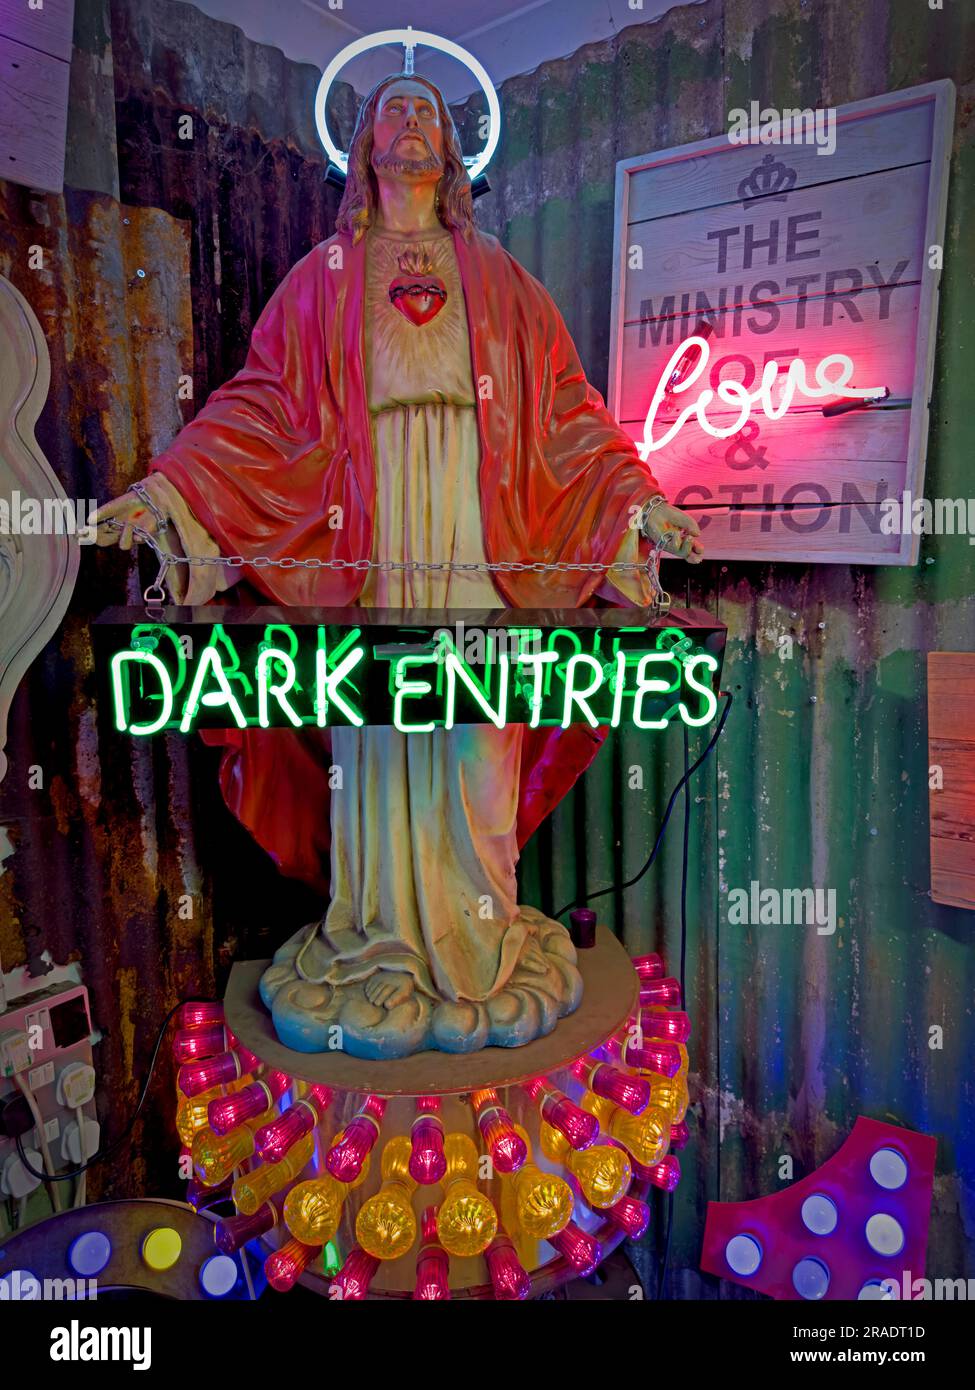 Jesus statue buddy Christ, with neon light design - The Ministry of Love & Action, Dark Entries Stock Photo